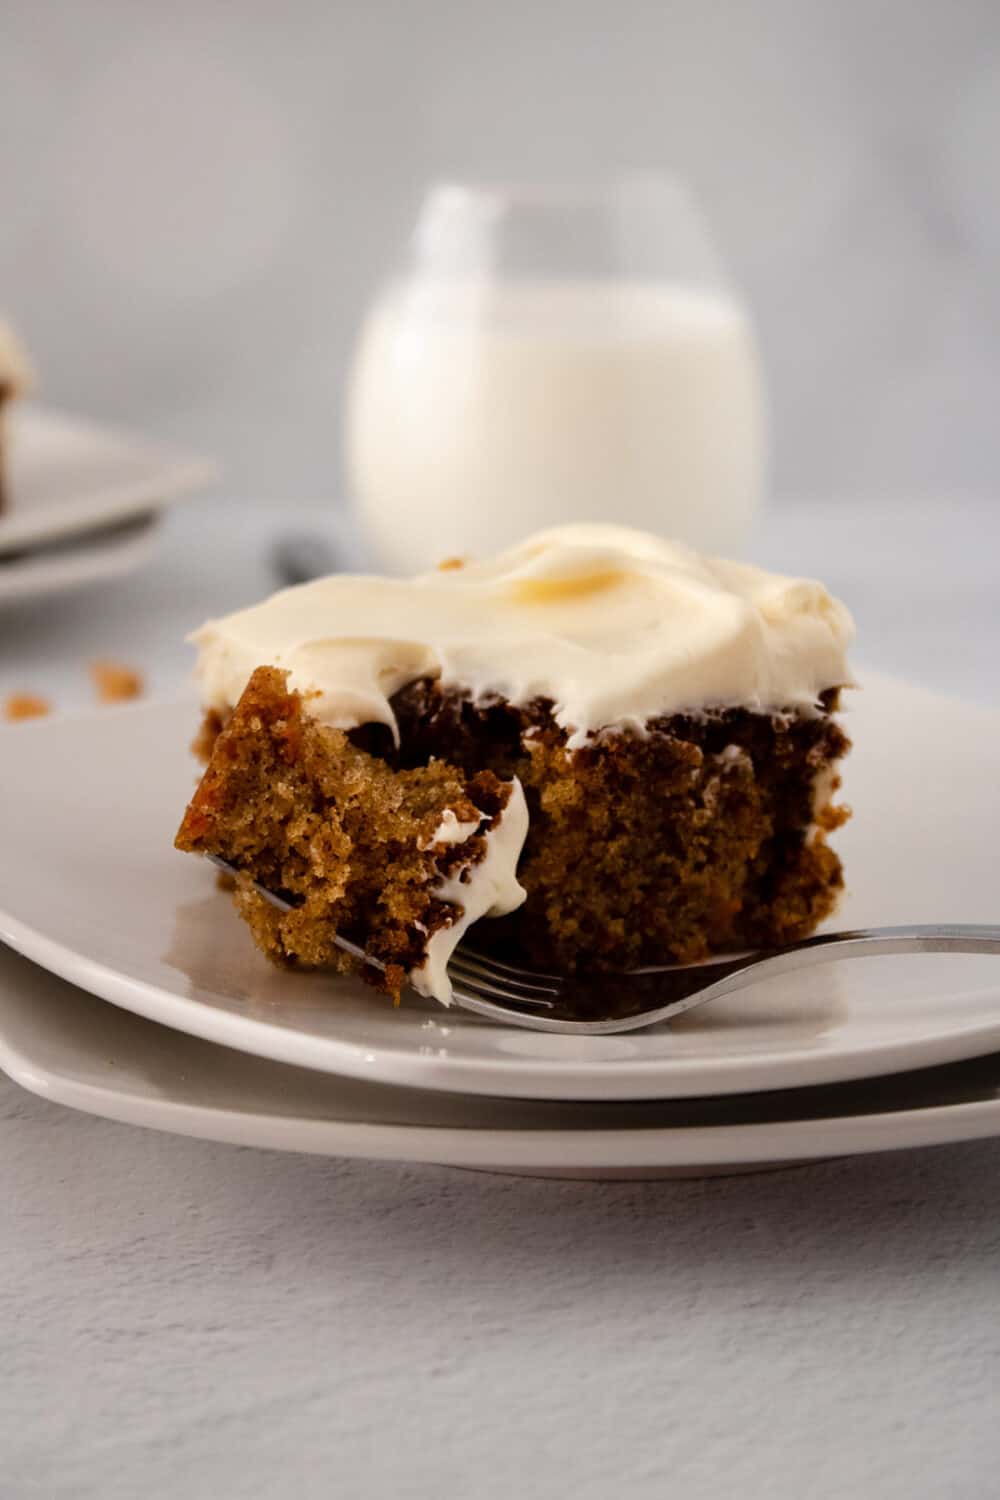 Ladies and gents, this is the most moist and delicious carrot cake you’ll ever have! Check out how I make my very famous Carrot Cake and I promise, you won’t ever use any other recipe again!